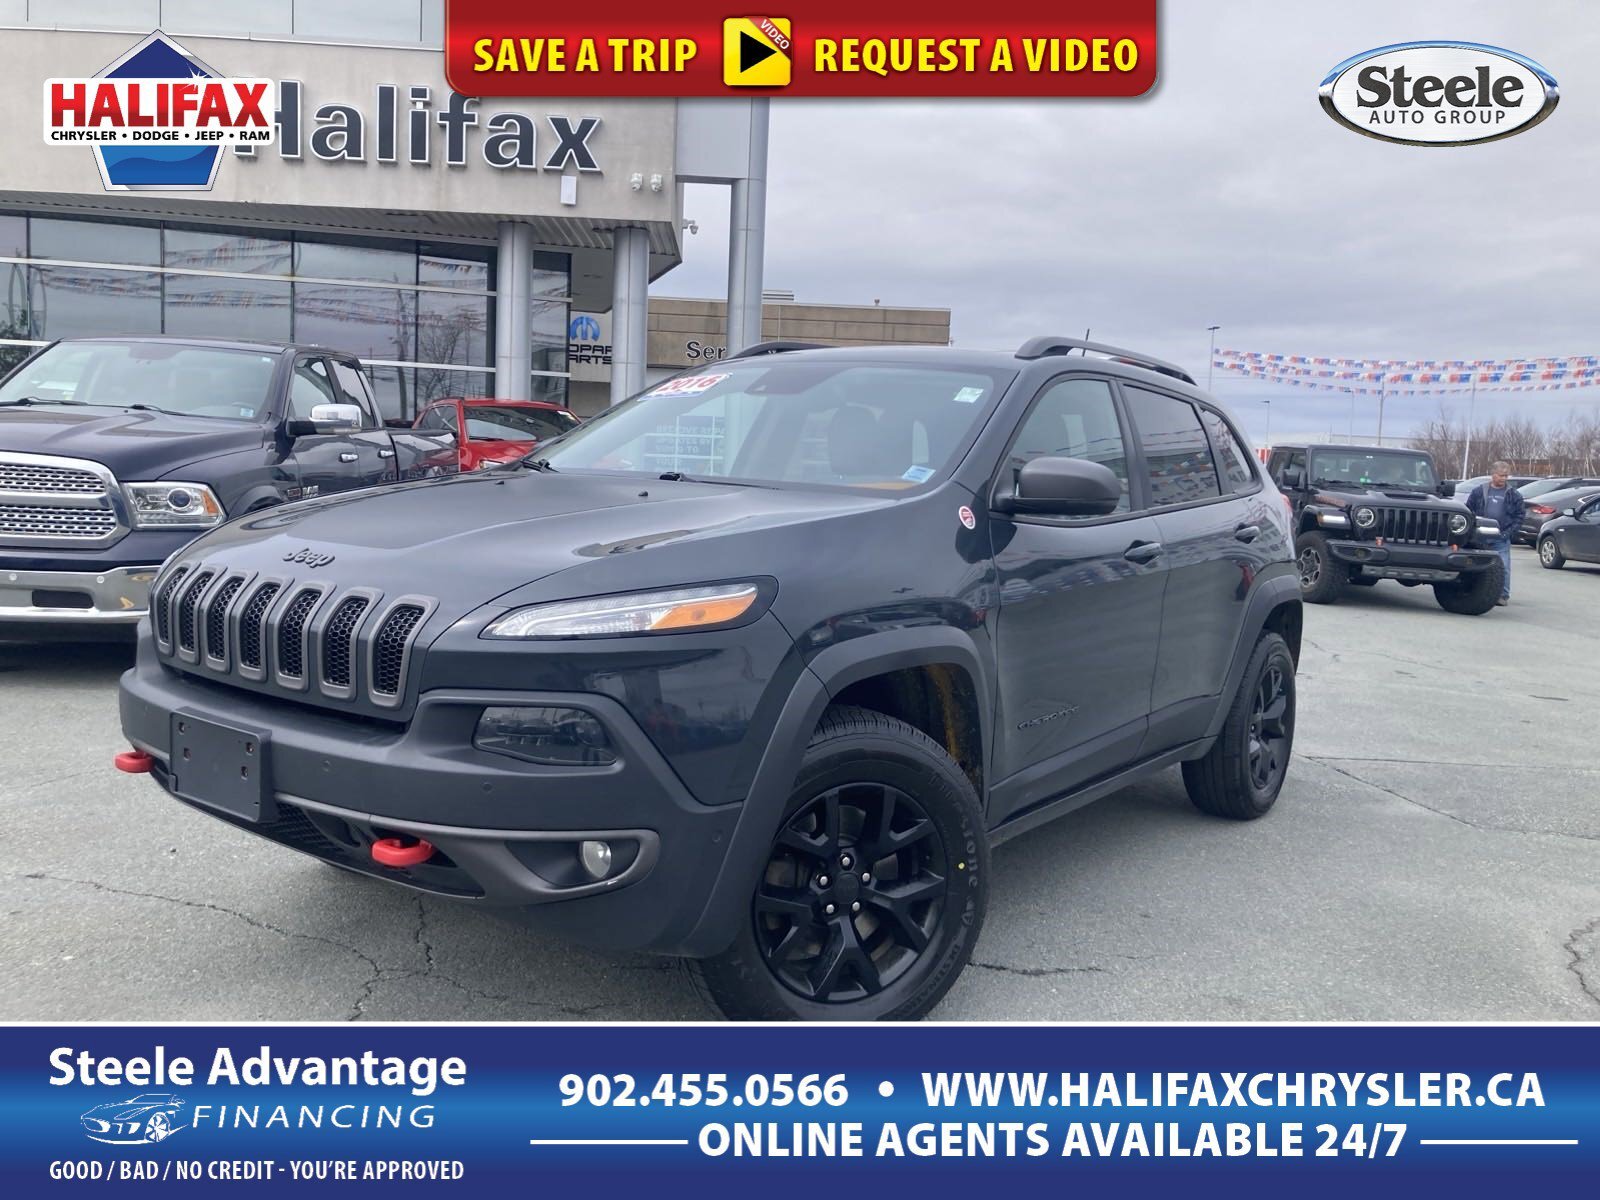 2016 Jeep Cherokee Trailhawk - NAV, HTD AND COOLED MEMORY LEATHER SEA